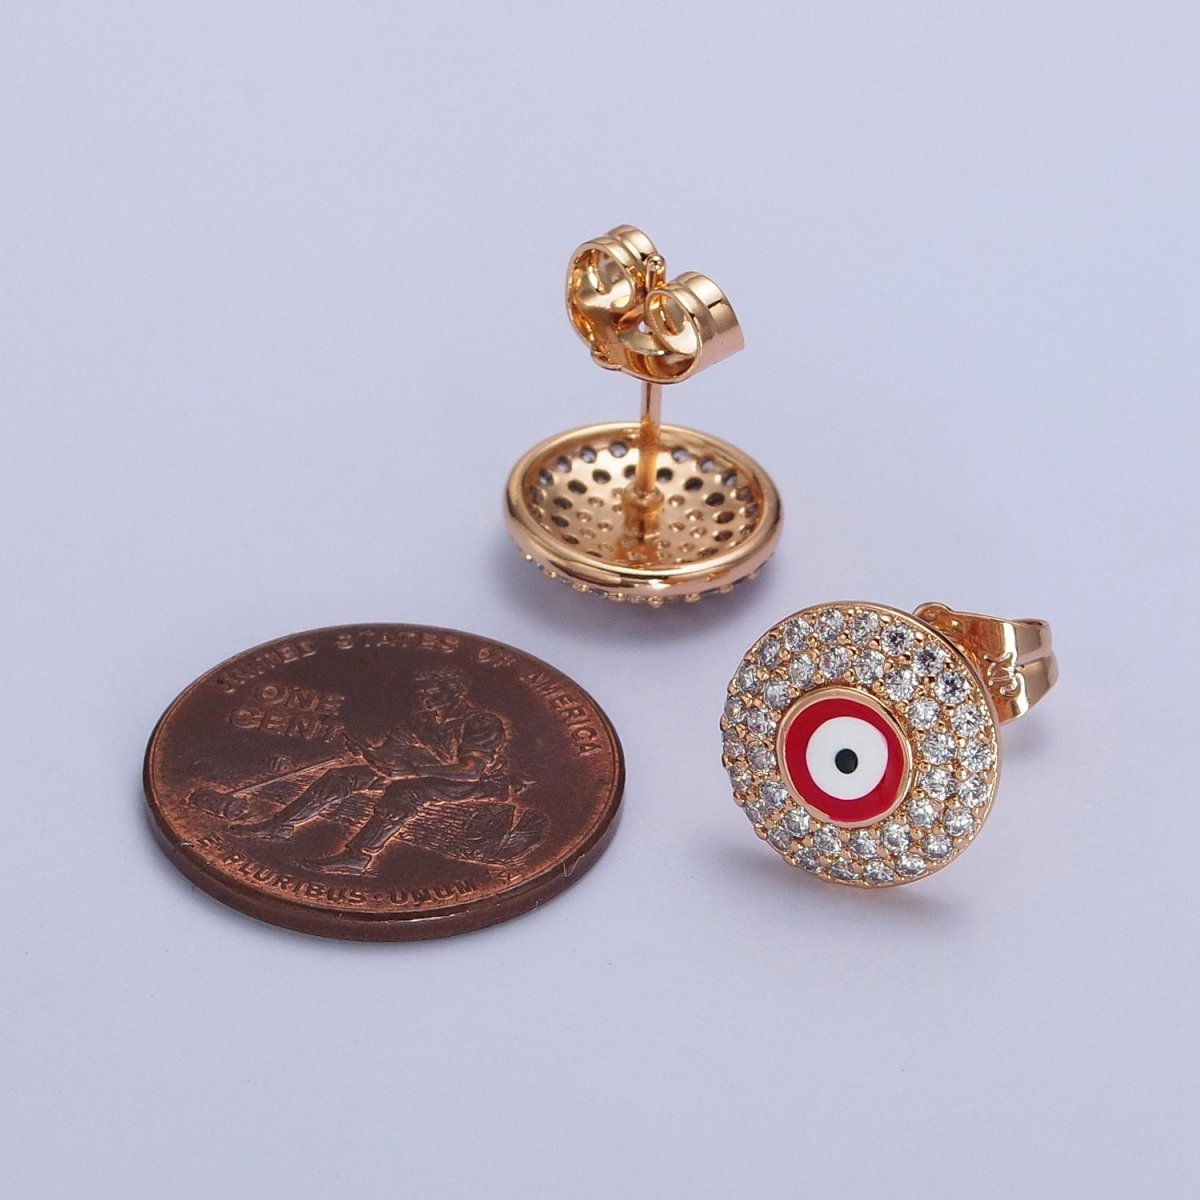 Red, Blue Evil Eye Enamel Clear Micro Paved CZ Round Stud Earrings | AB226 AB227 - DLUXCA